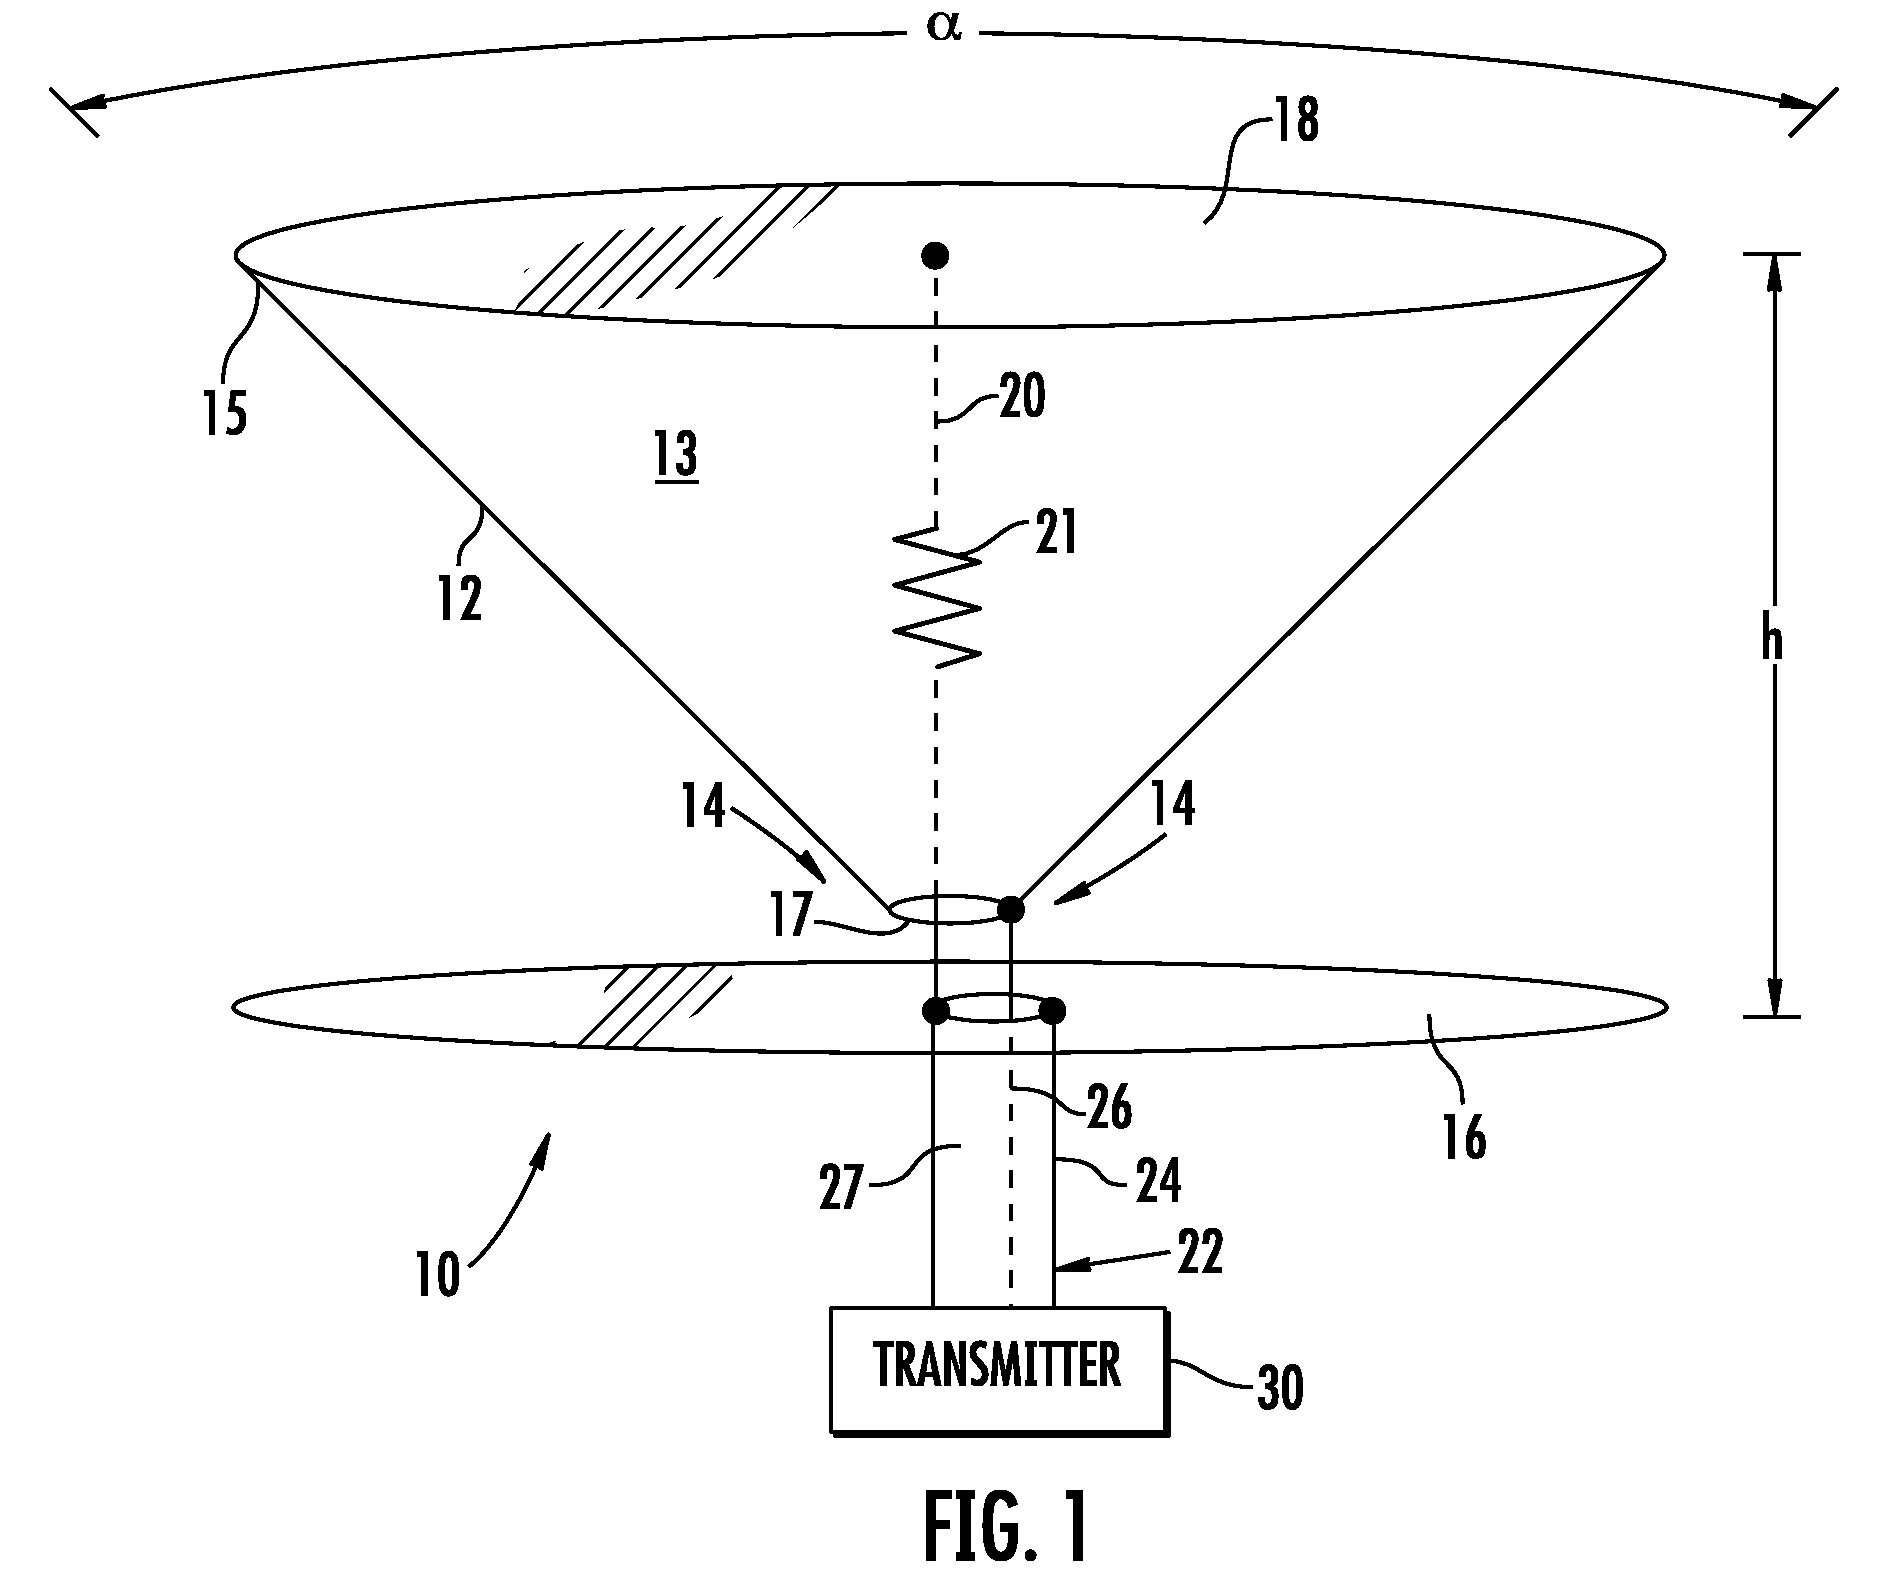 Folded conical antenna and associated methods